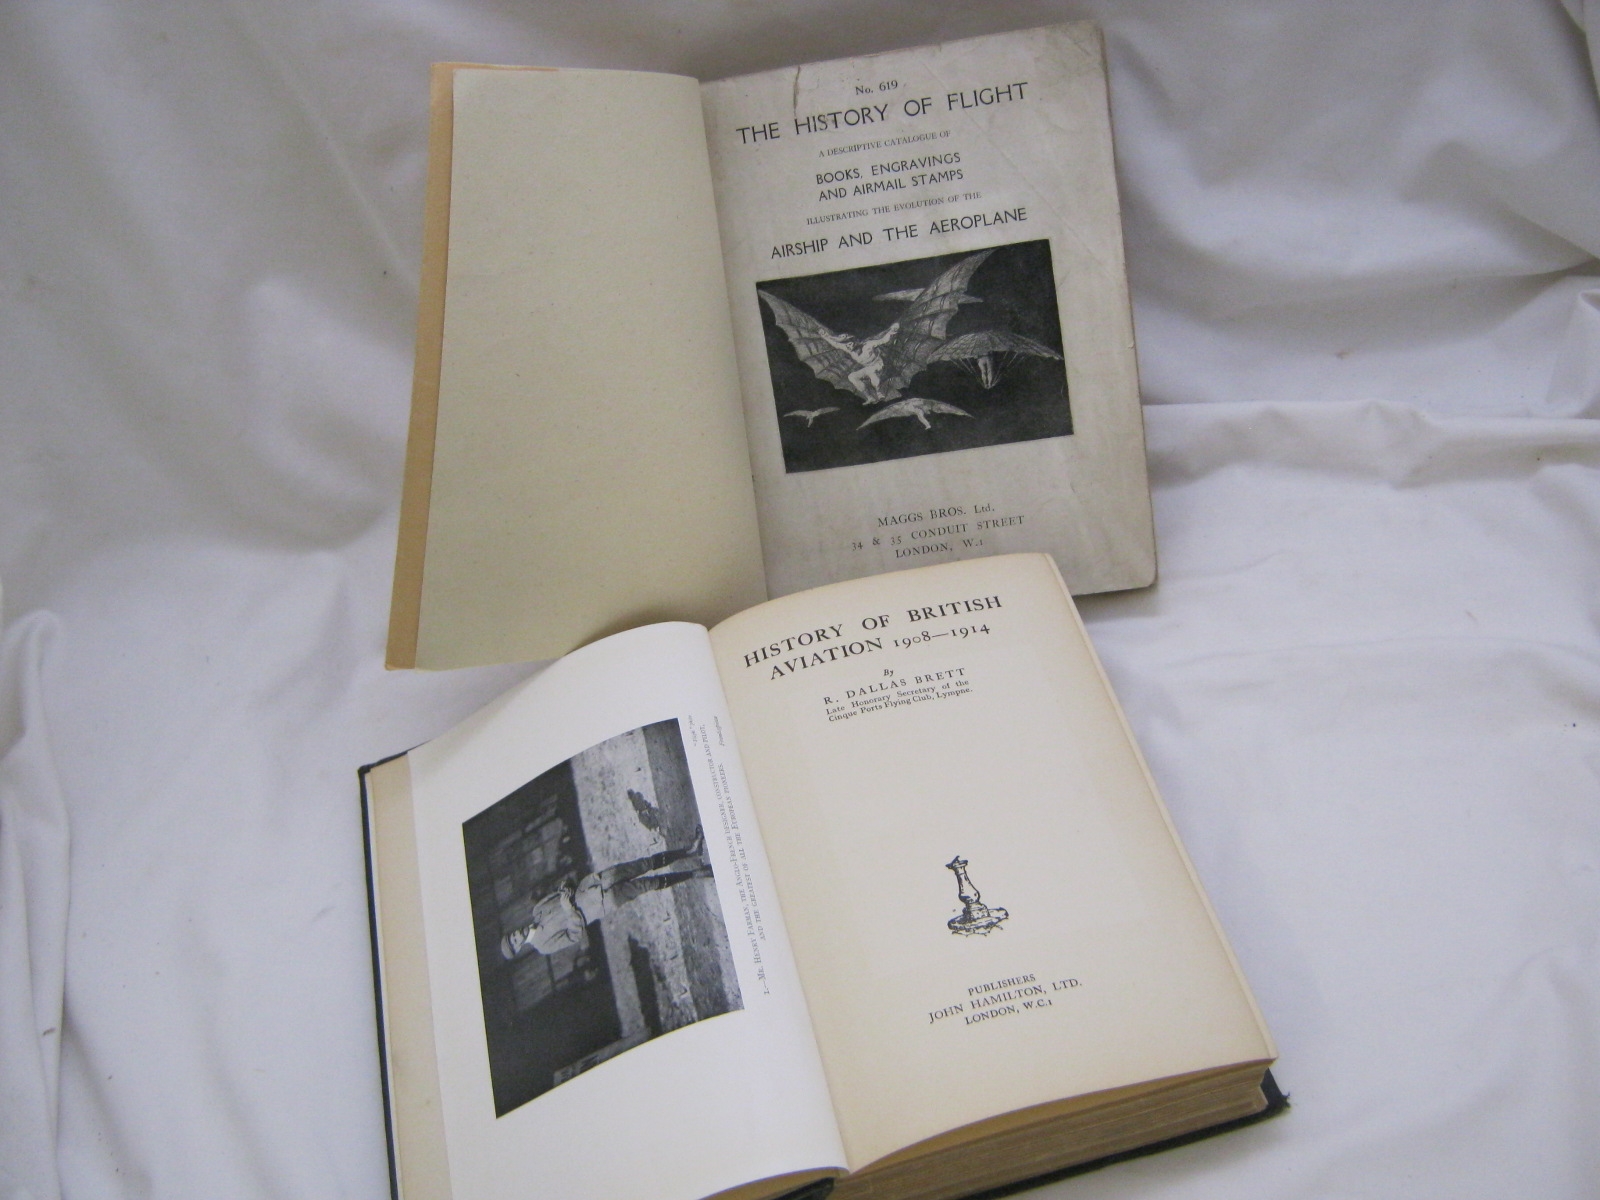 MAGGS BROS LIMITED (PUB): THE HISTORY OF FLIGHT A DESCRIPTIVE CATALOGUE OF BOOKS, ENGRAVINGS AND